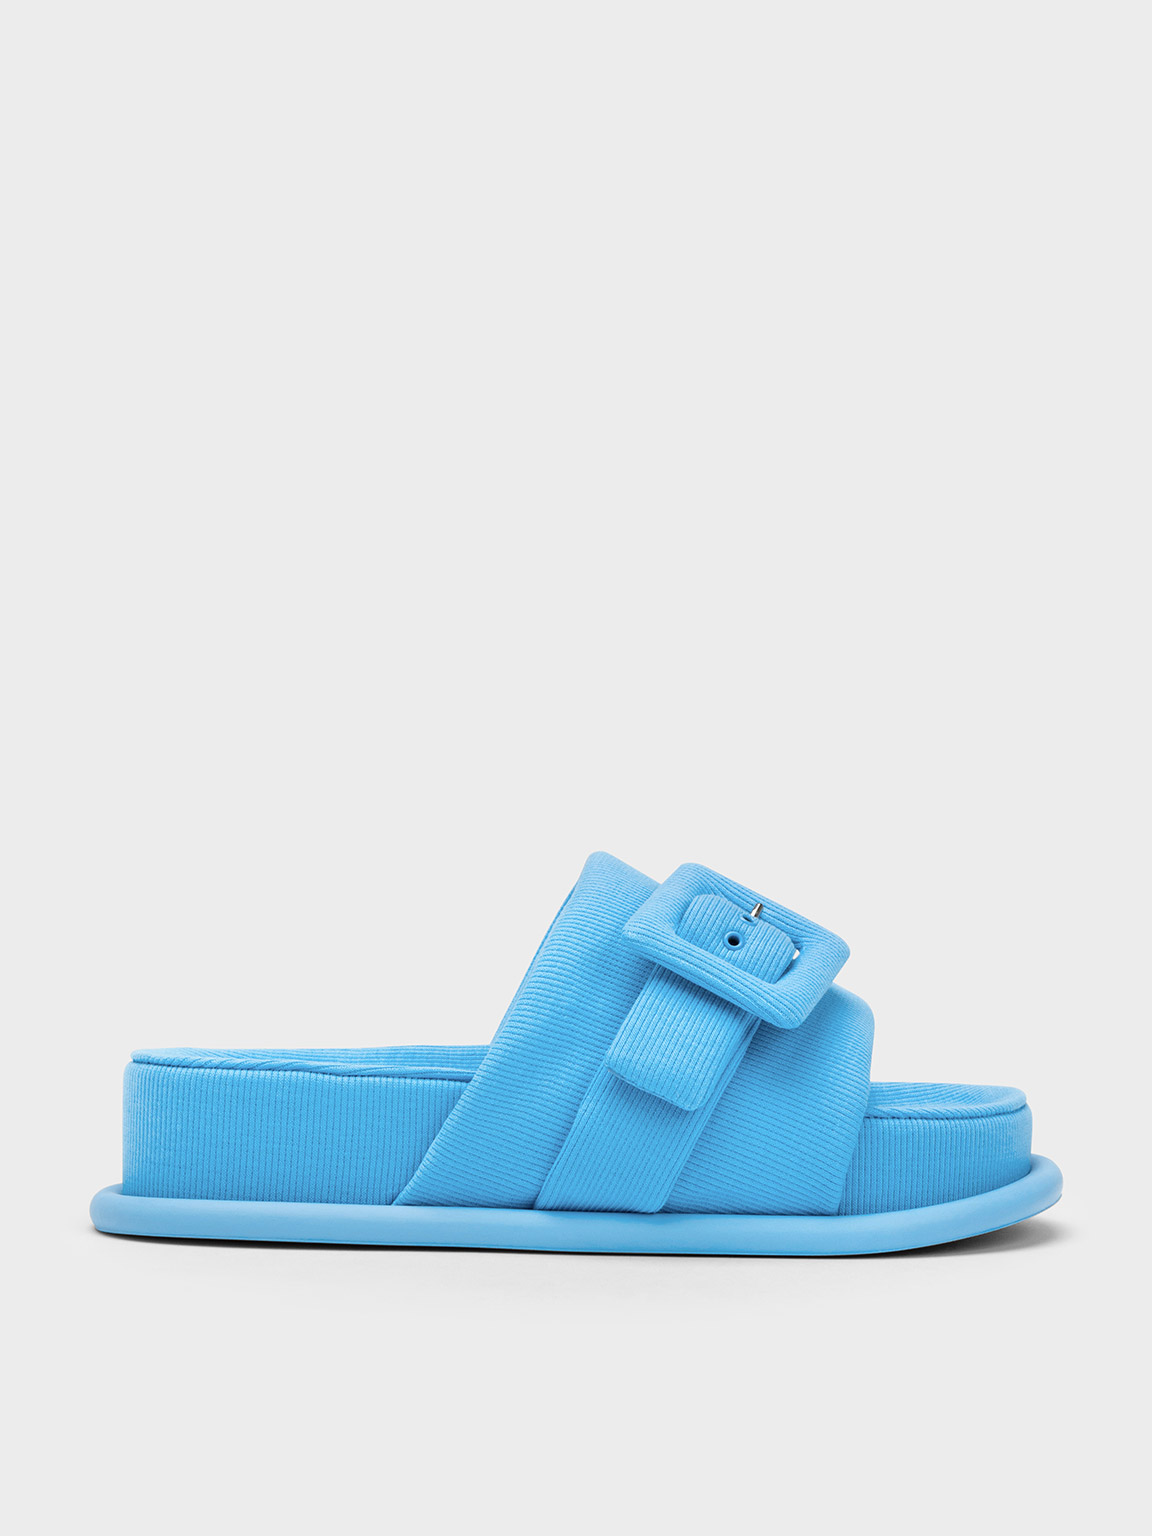 Blue Sinead Woven Buckled Slide Sandals - CHARLES & KEITH MY